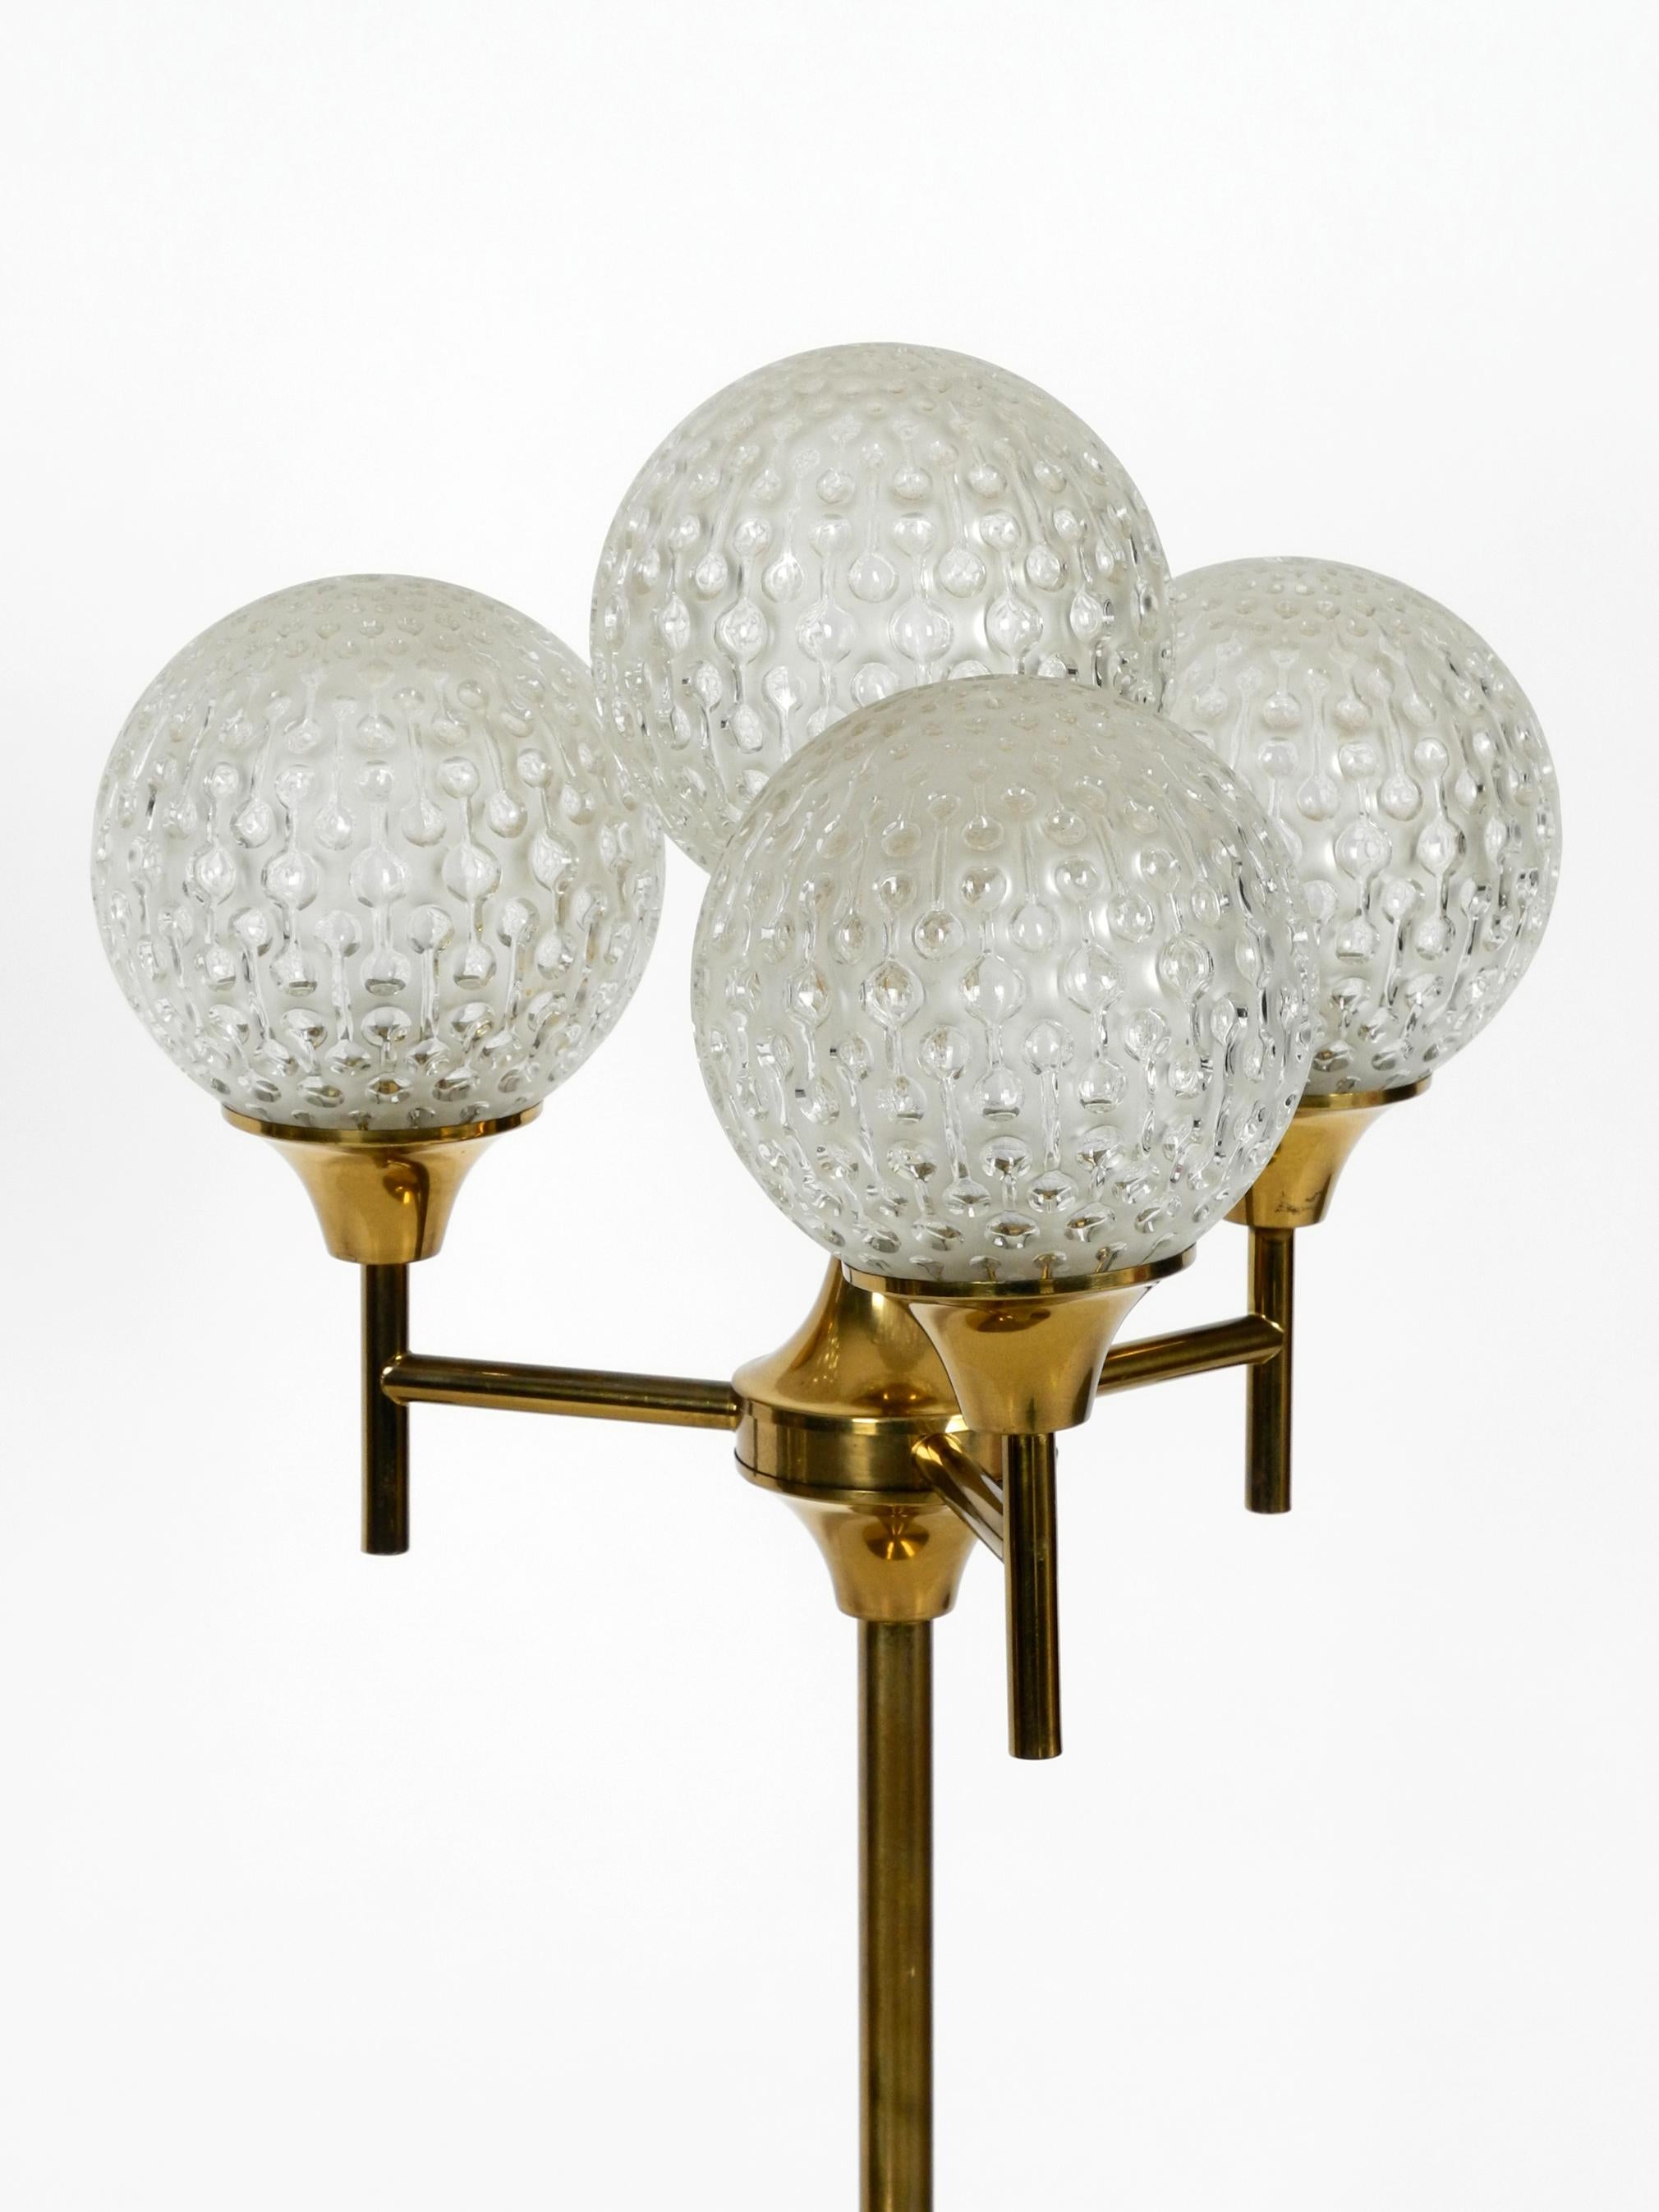 Exceptional Large 1960s Full Brass Table or Floor Lamp with 4 Glass Balls 1